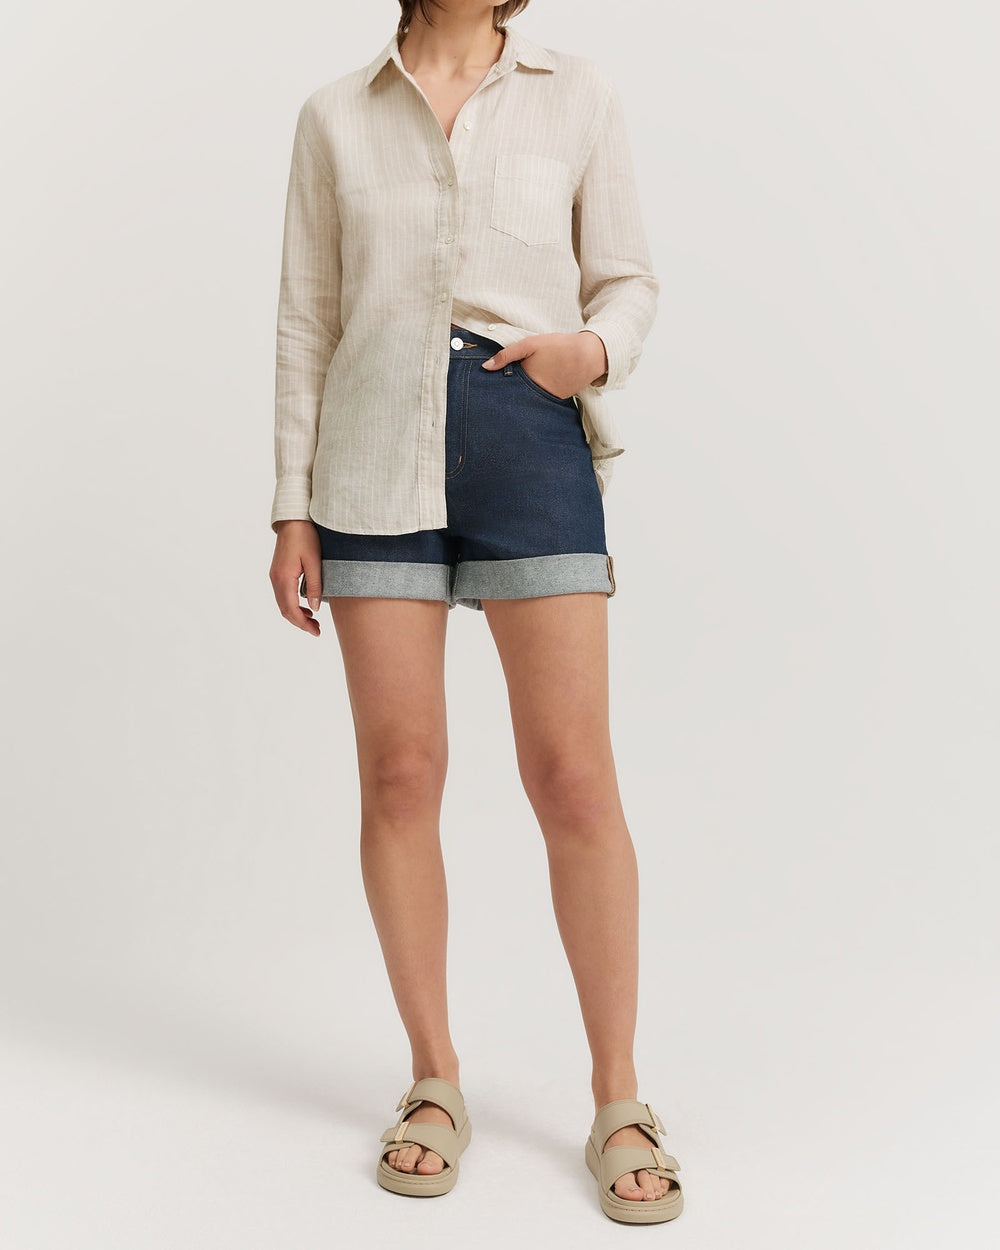 Denim shorts from the Country Road selection.